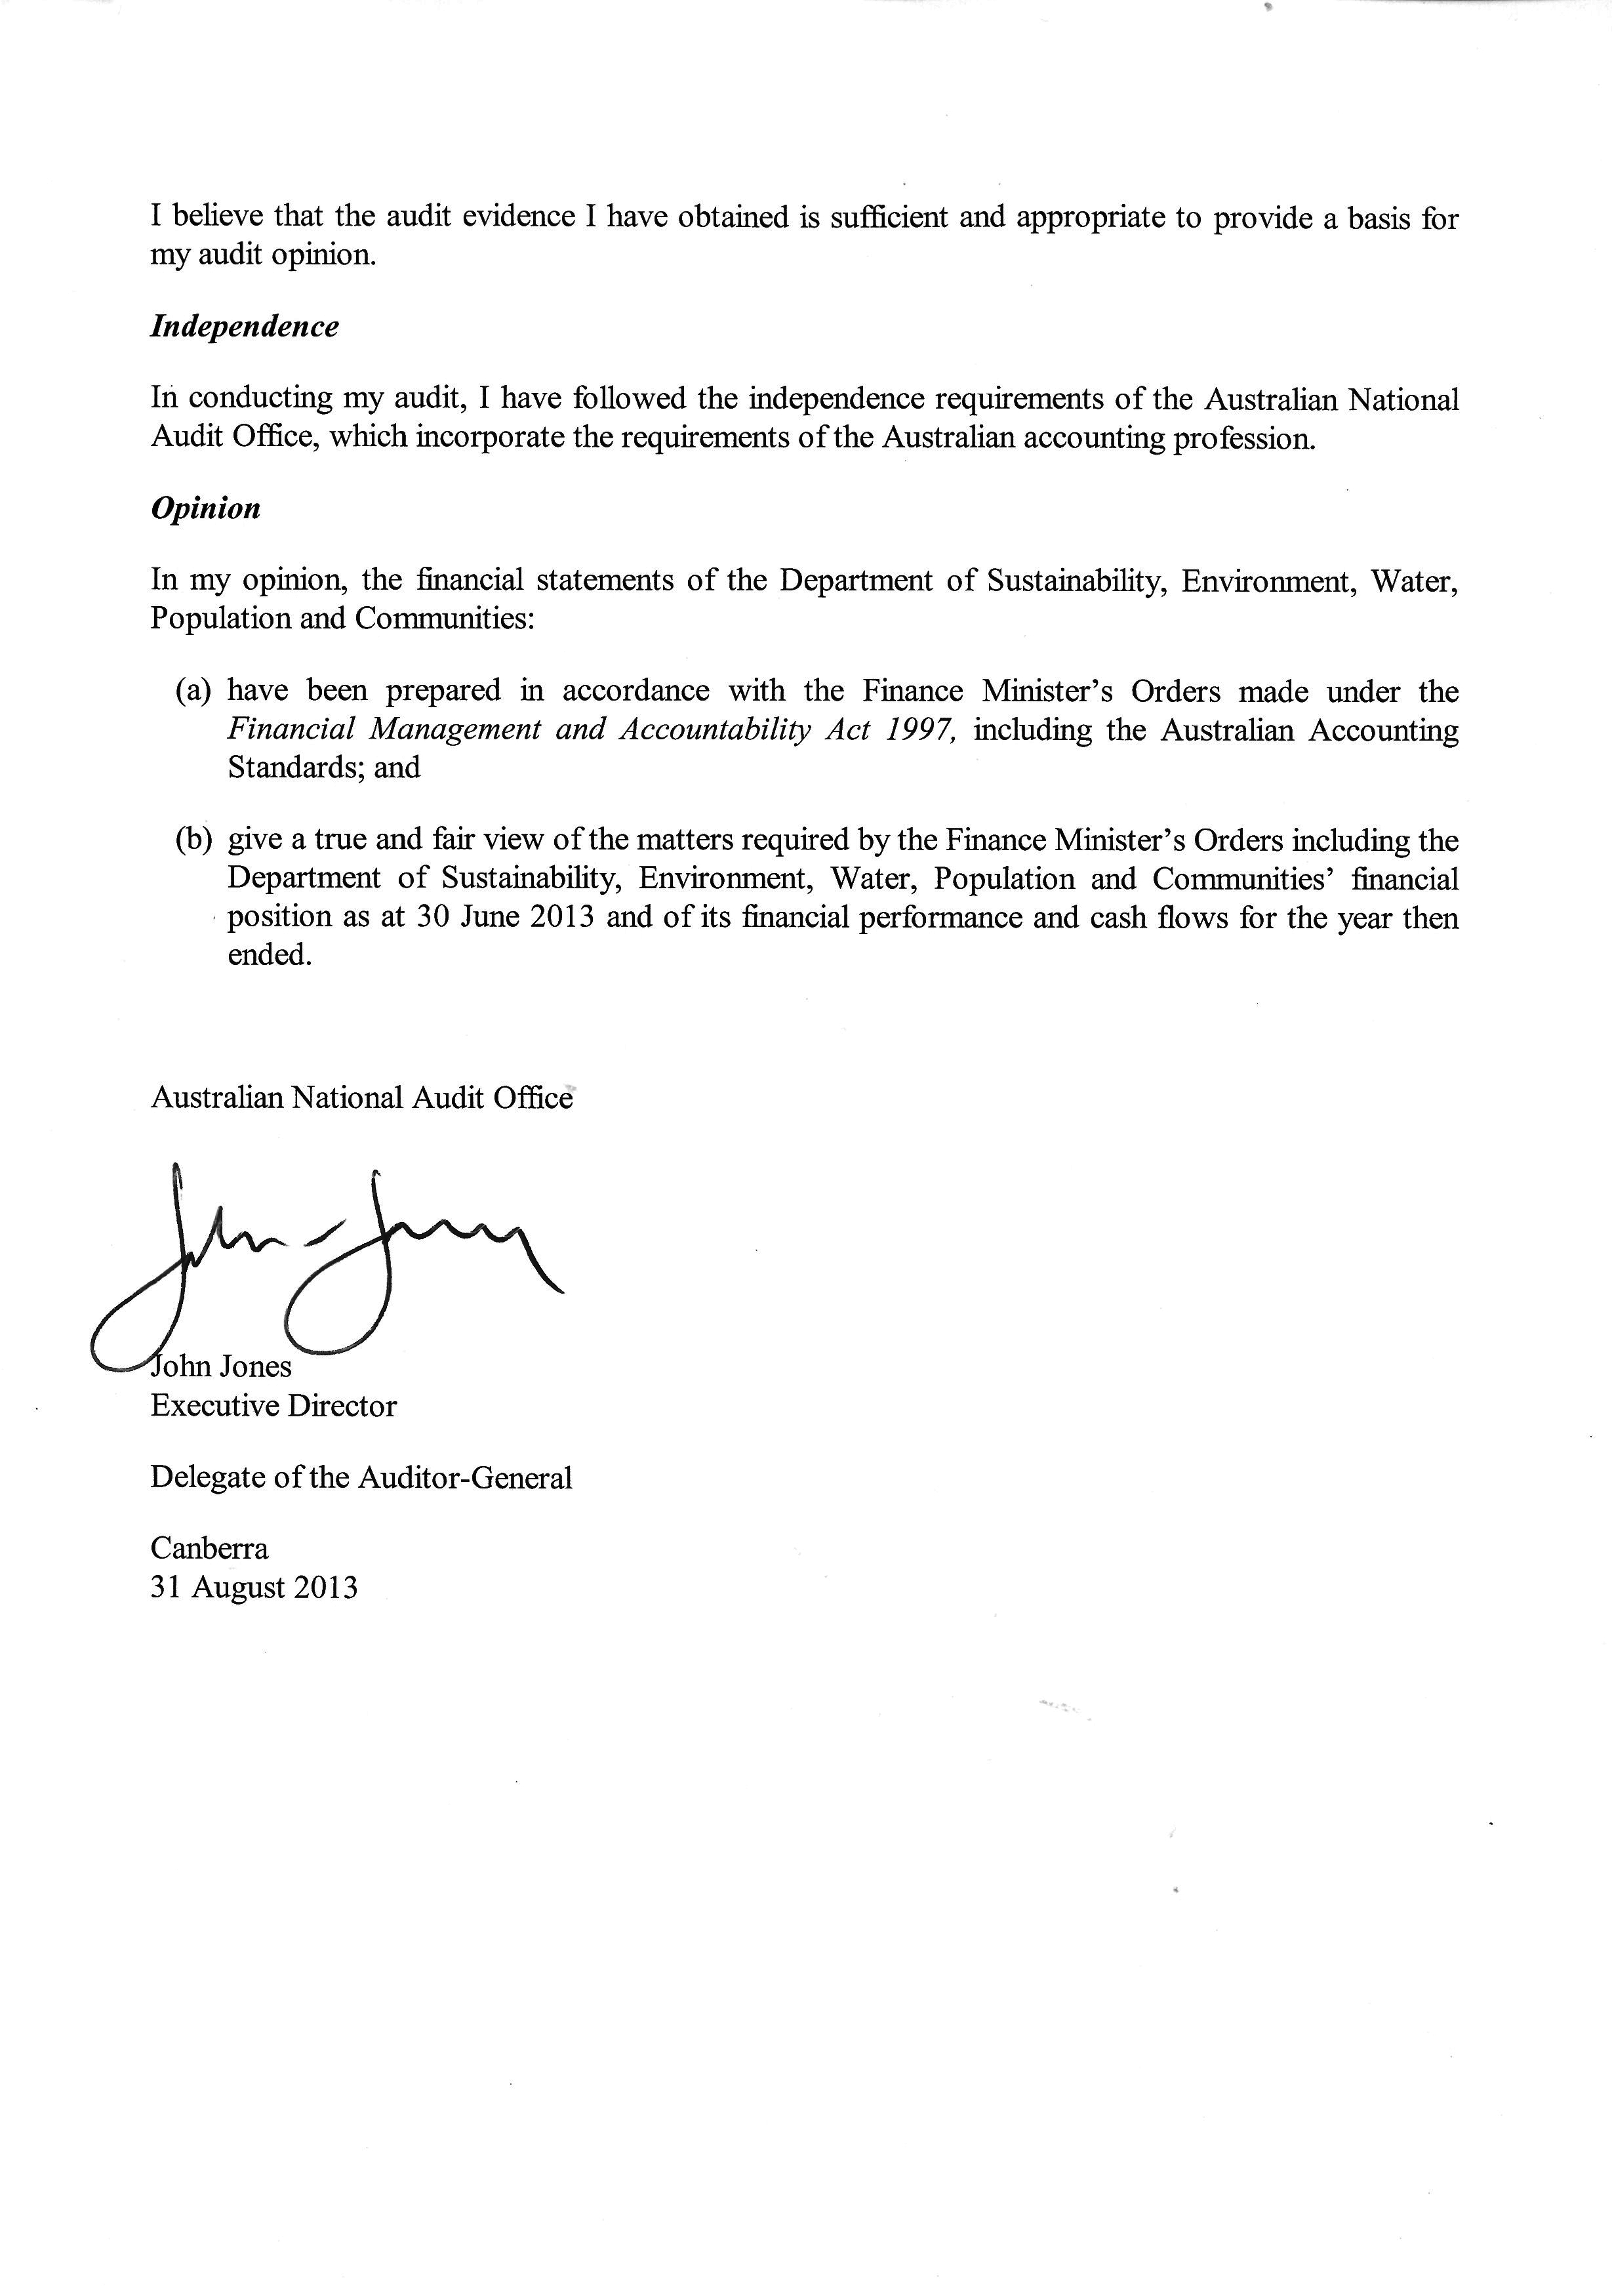 independent auditor’s report for the financial statements for the department of sustainability, environment, water, population and communities. covering letter to the minister for the environment, heritage and water. signed john jones, executive director, australian national audit office, delegate of the auditor-general, canberra, 31 august 2013 (page 2 of 2).